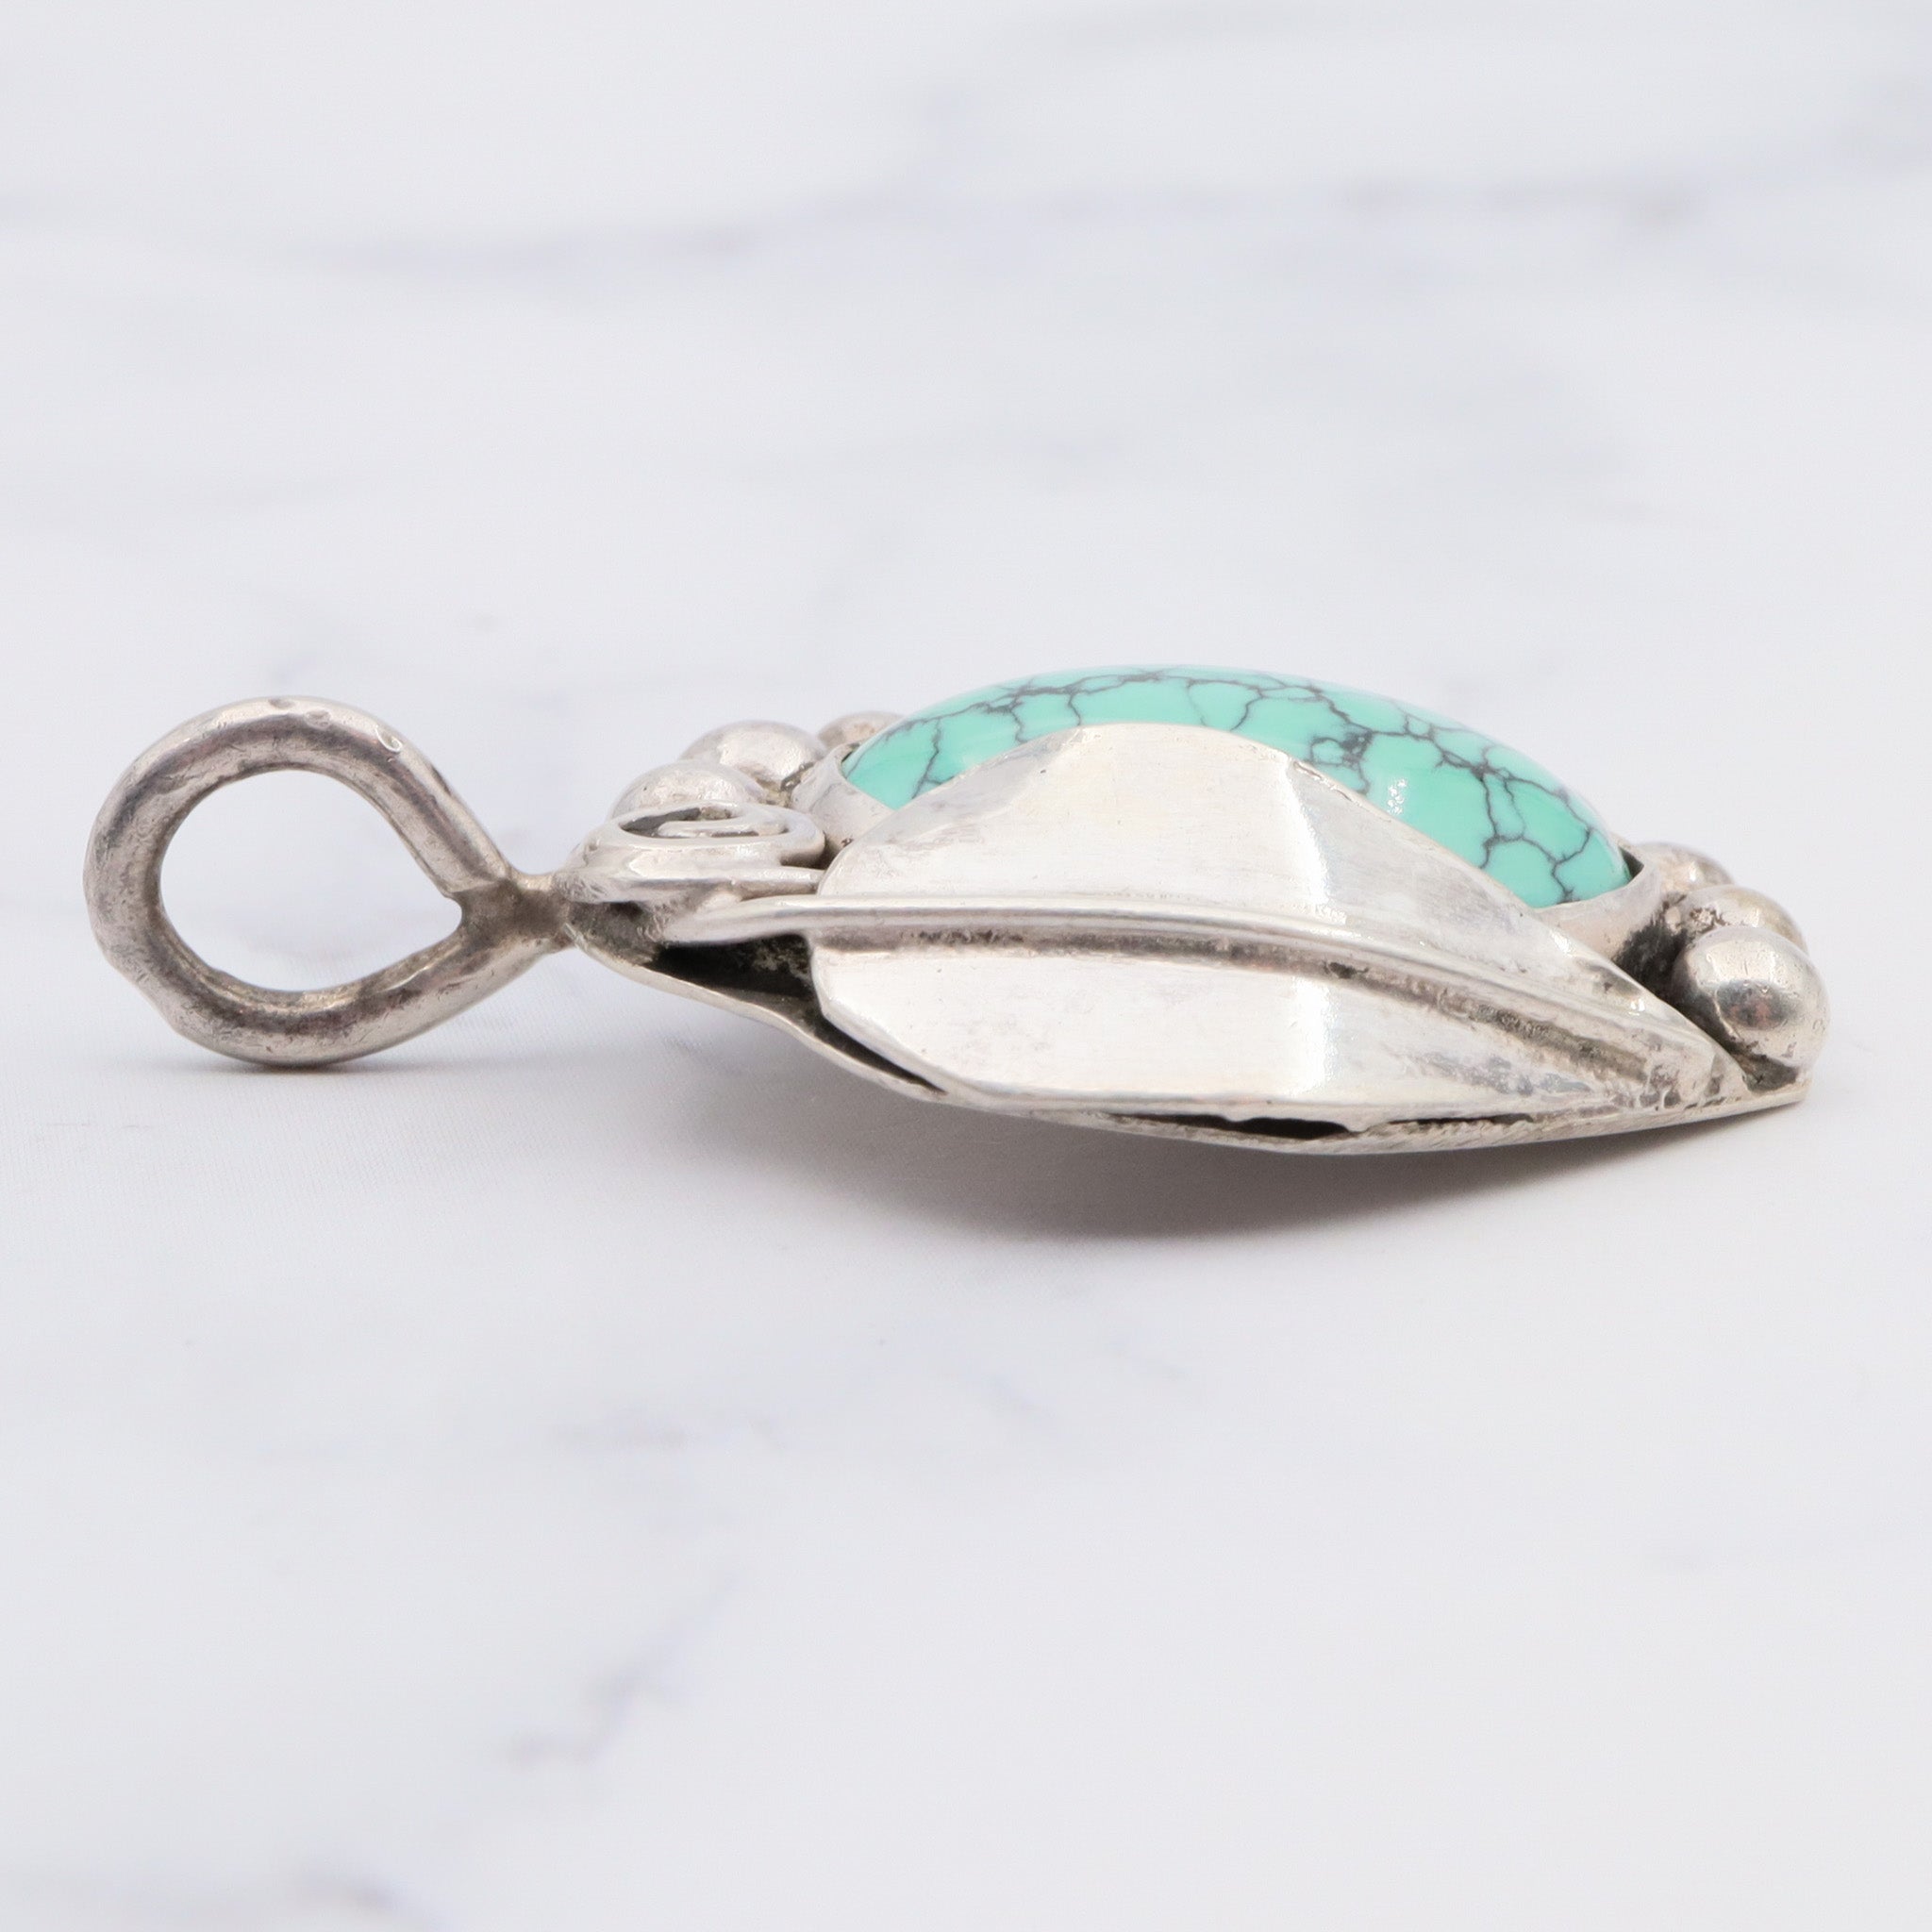 Native American sterling silver and turquoise handmade leaf pendant